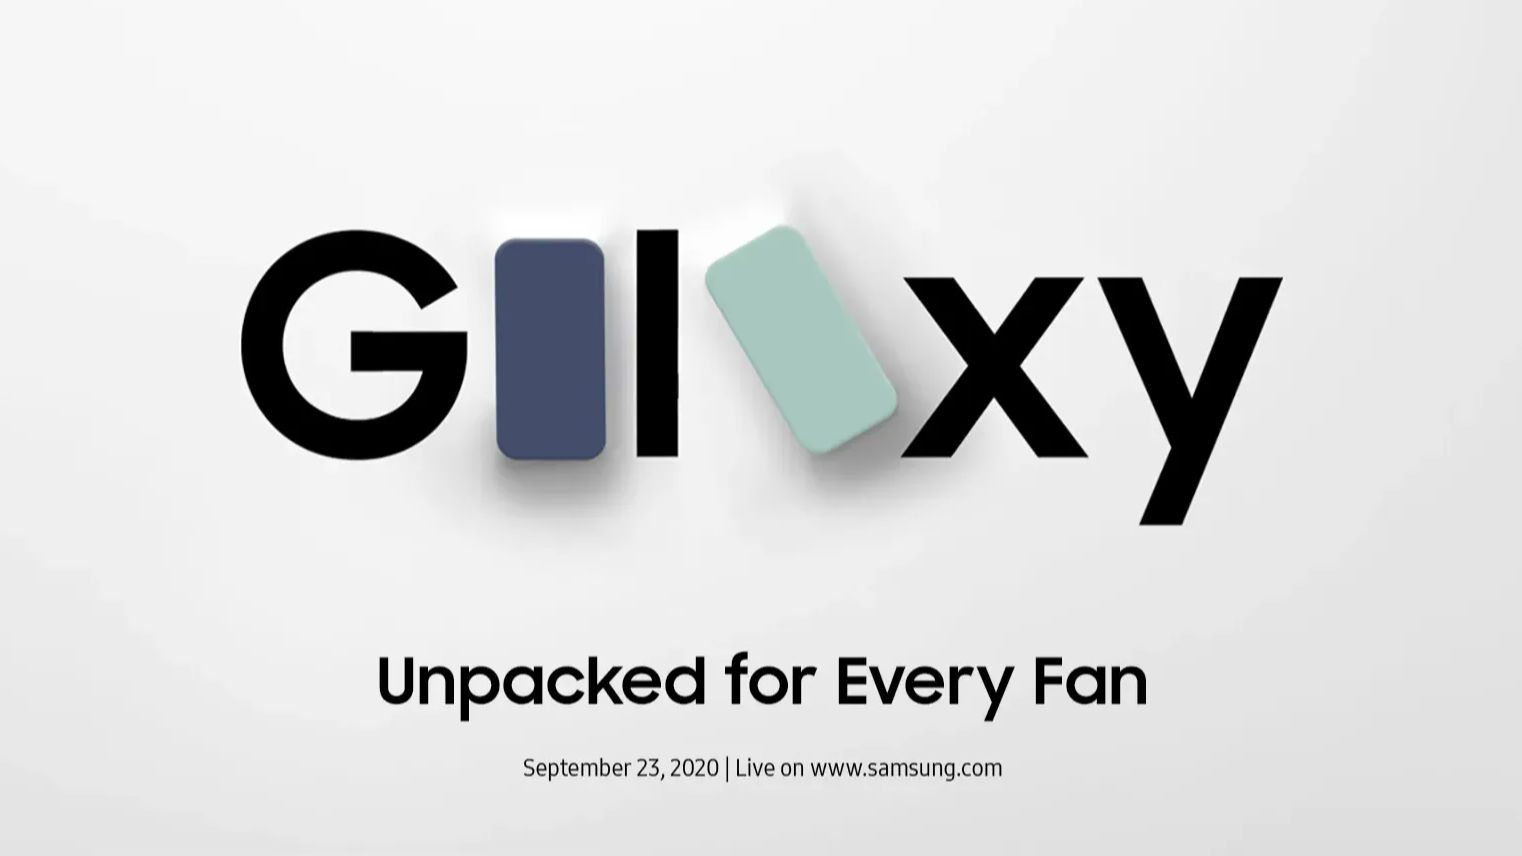 Samsung Galaxy Unpacked event: Where to watch, what to expect?